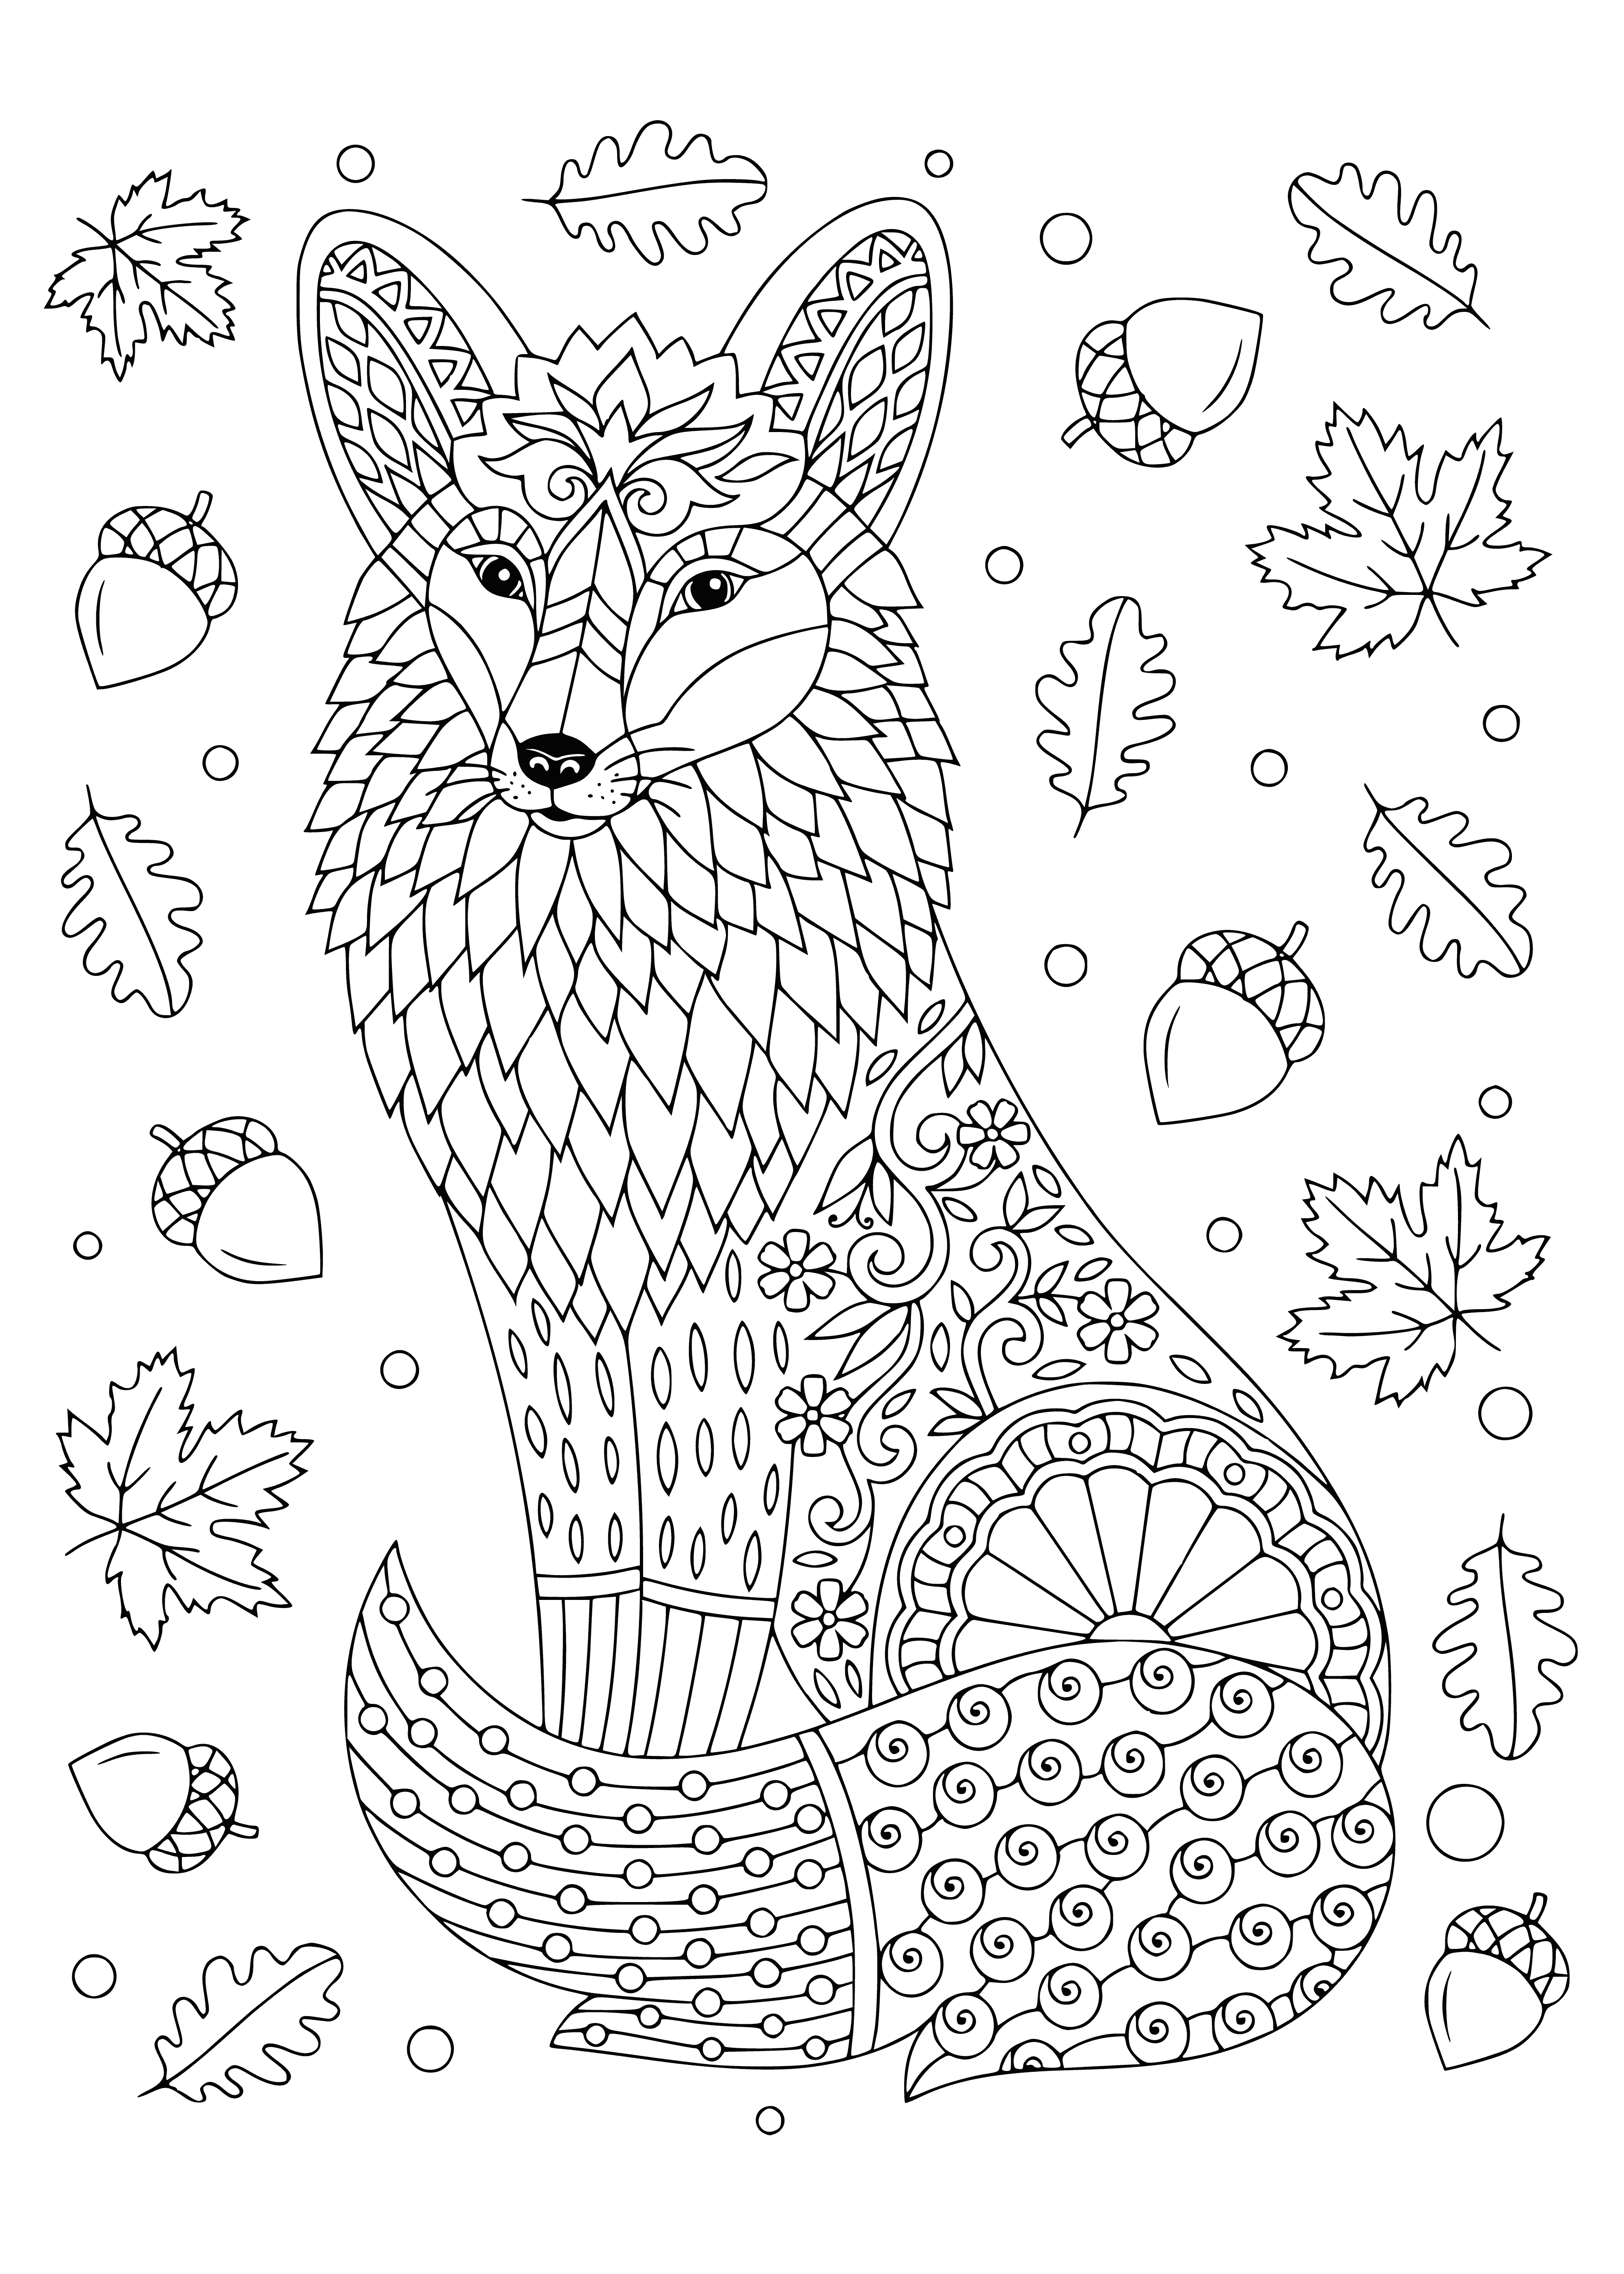 coloring page: Fox with bright orange coat and white-tipped tail lounging on grassy green background. White chest, inside ears, and black nose.